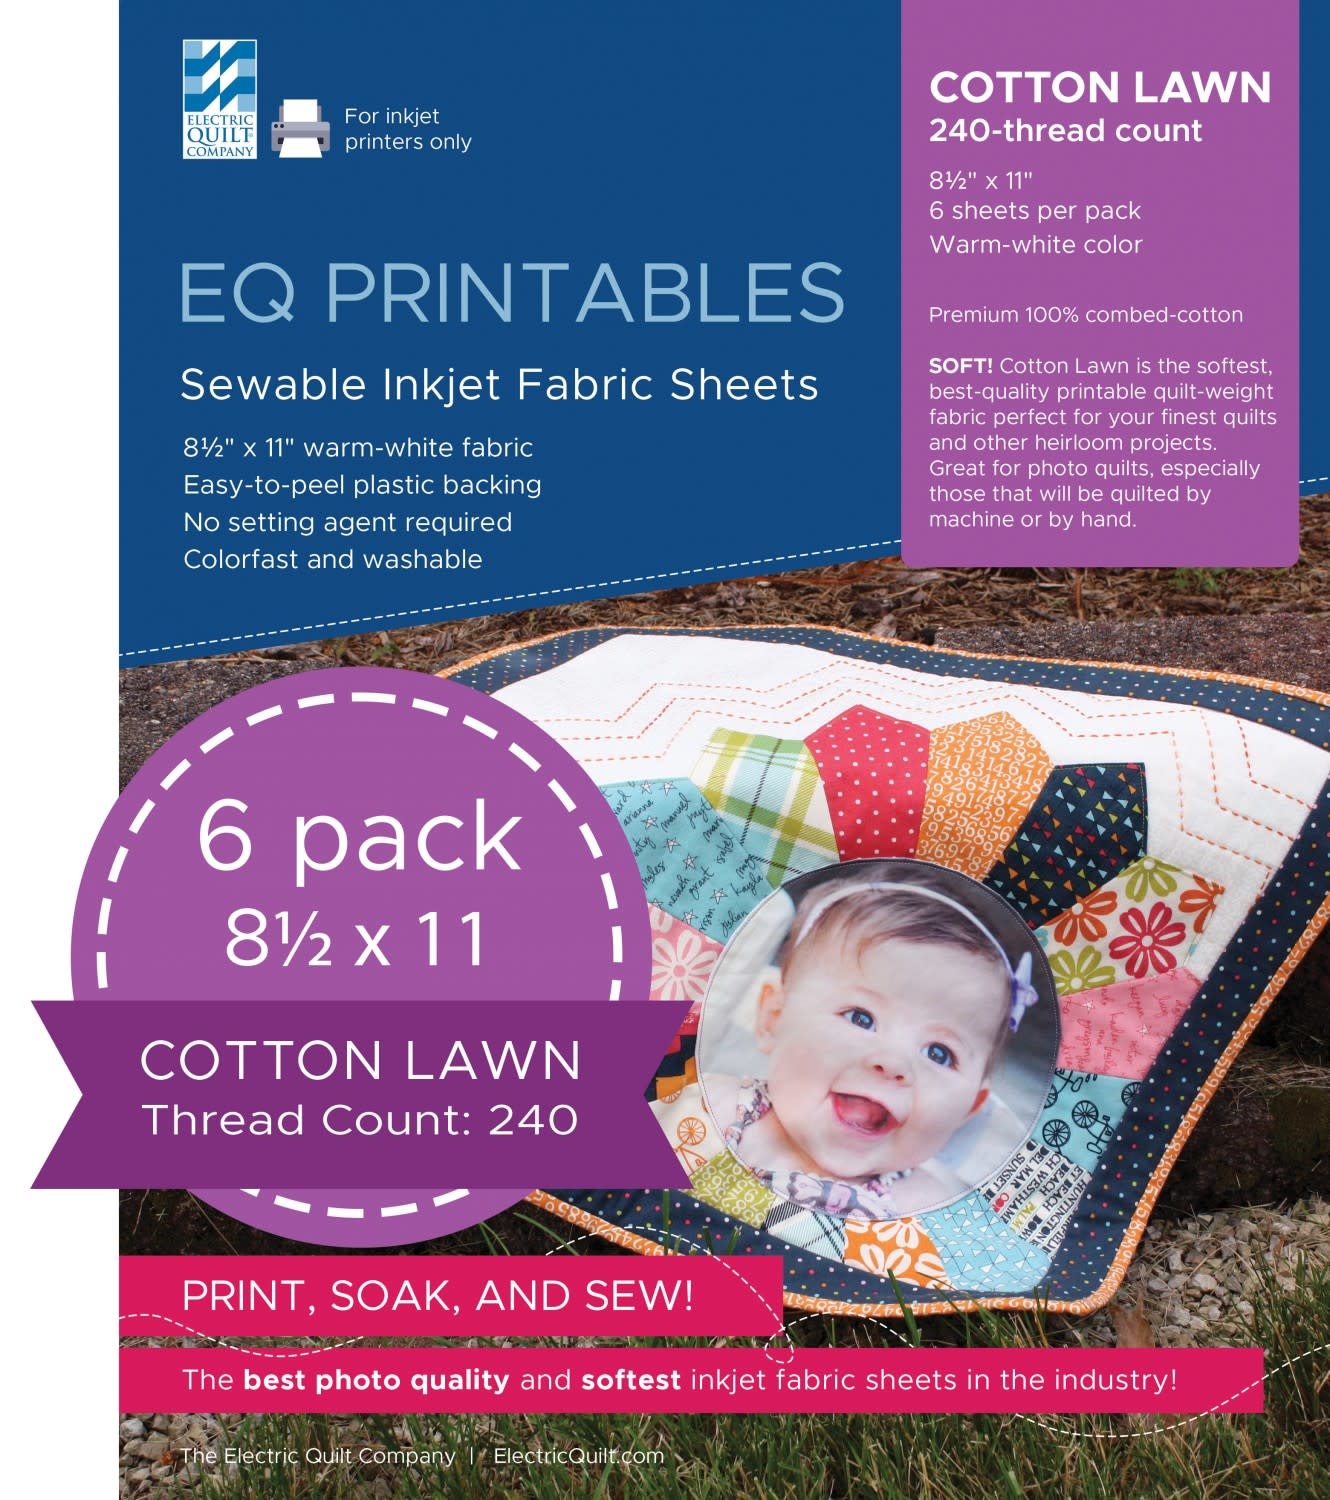 Electric Quilt Company EQ Cotton Lawn Inkjet Fabric Sheets